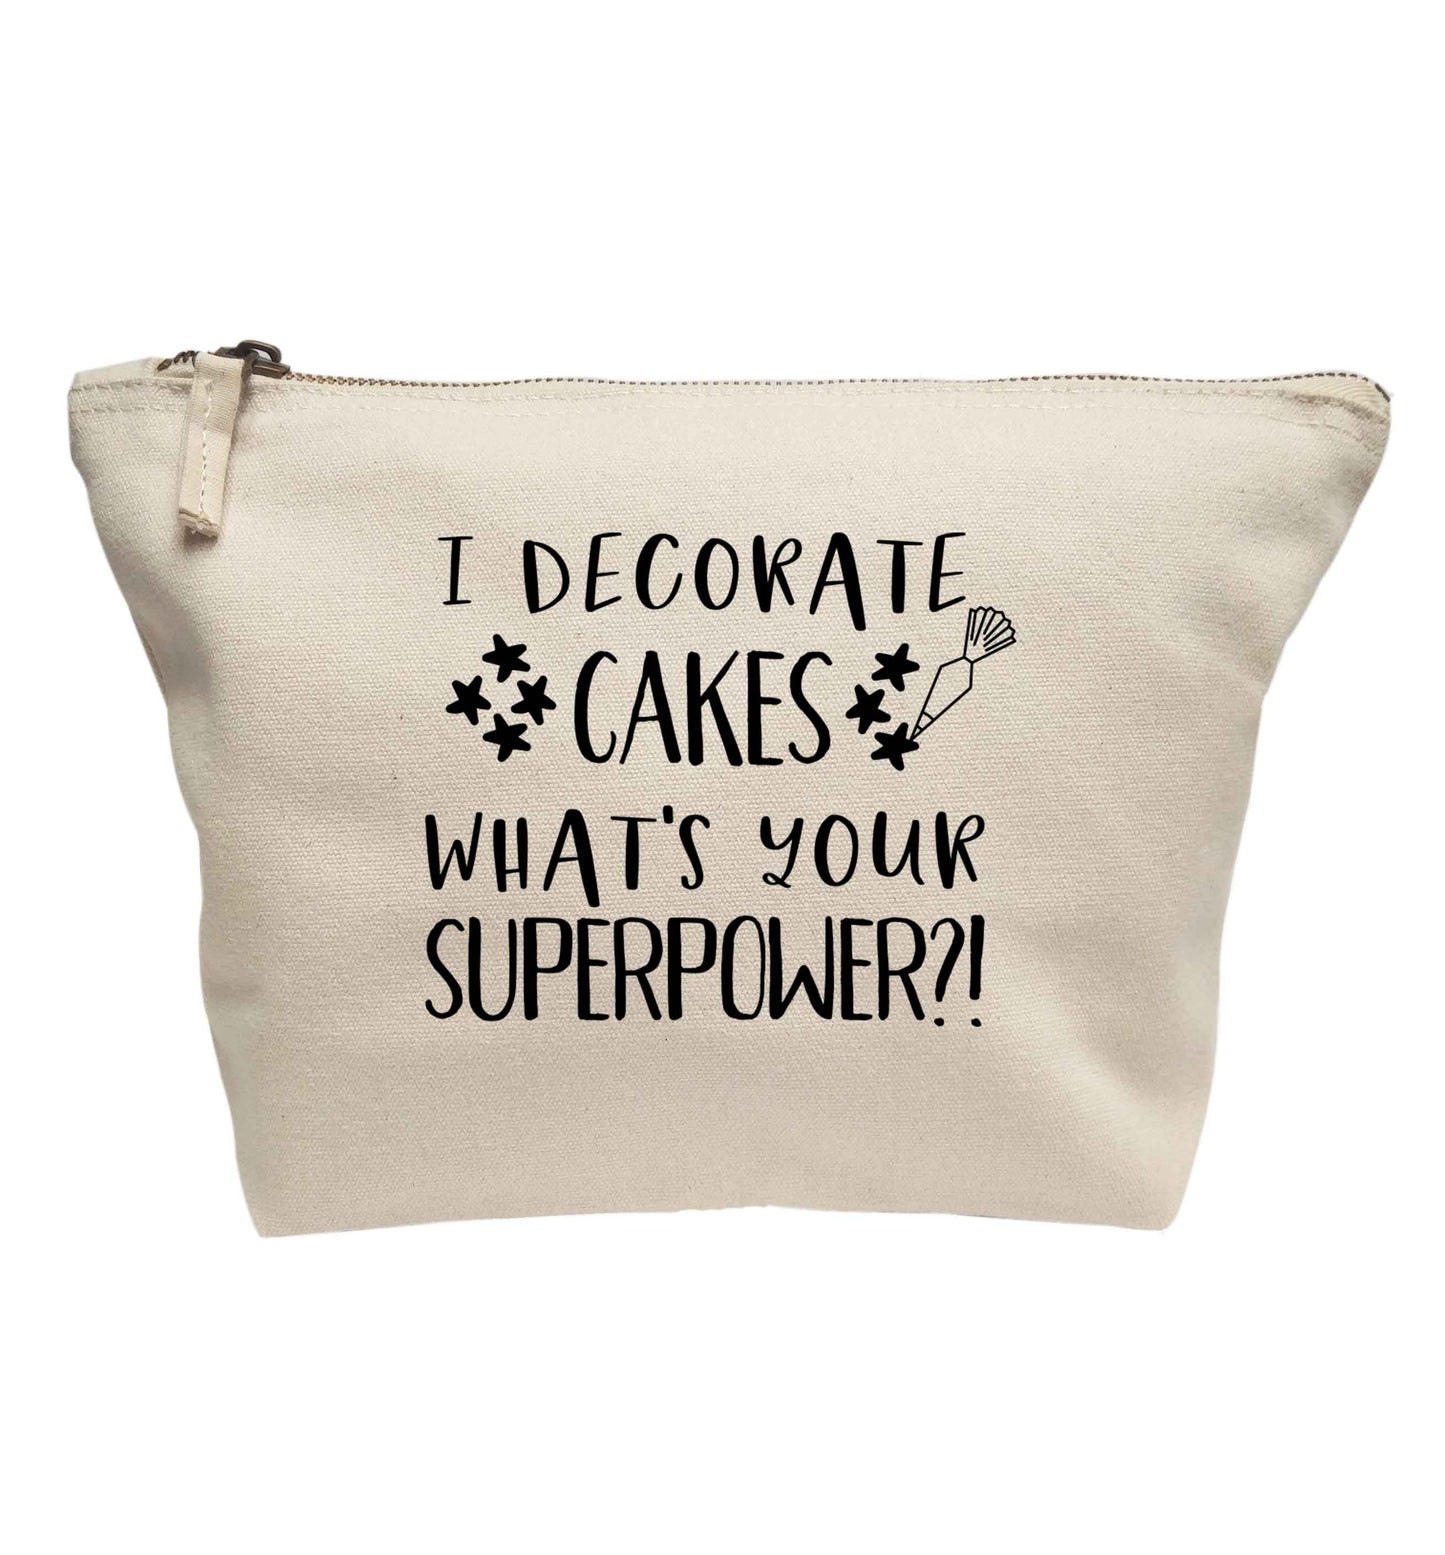 I decorate cakes what's your superpower?! | makeup / wash bag